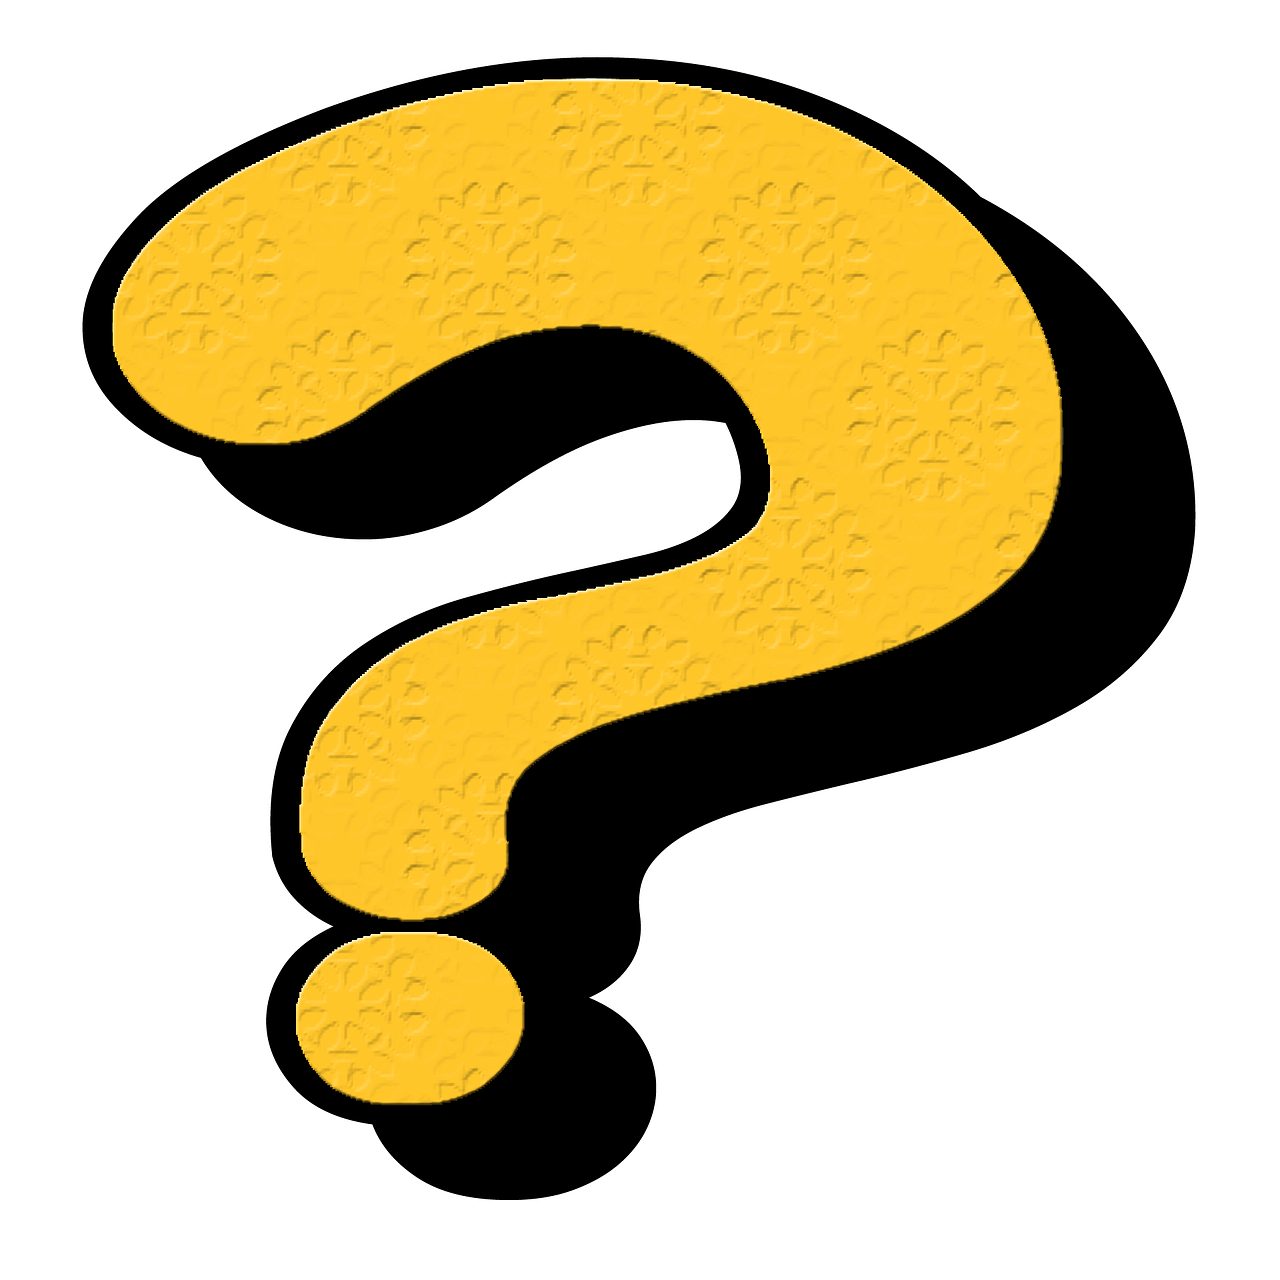 question-mark-punctuation-symbol-png-picpng